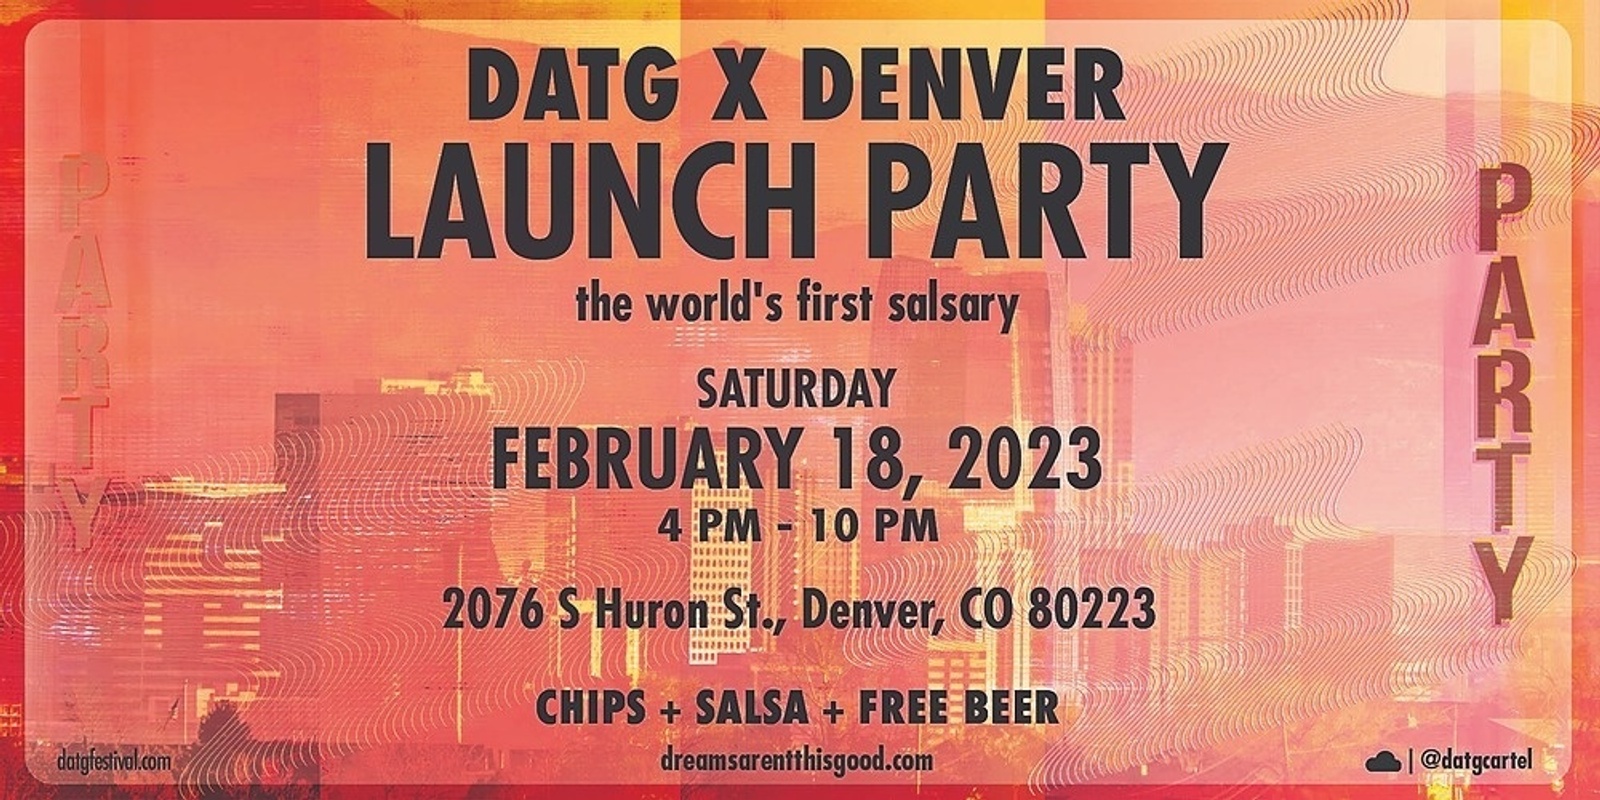 Banner image for DATG X DENVER LAUNCH PARTY